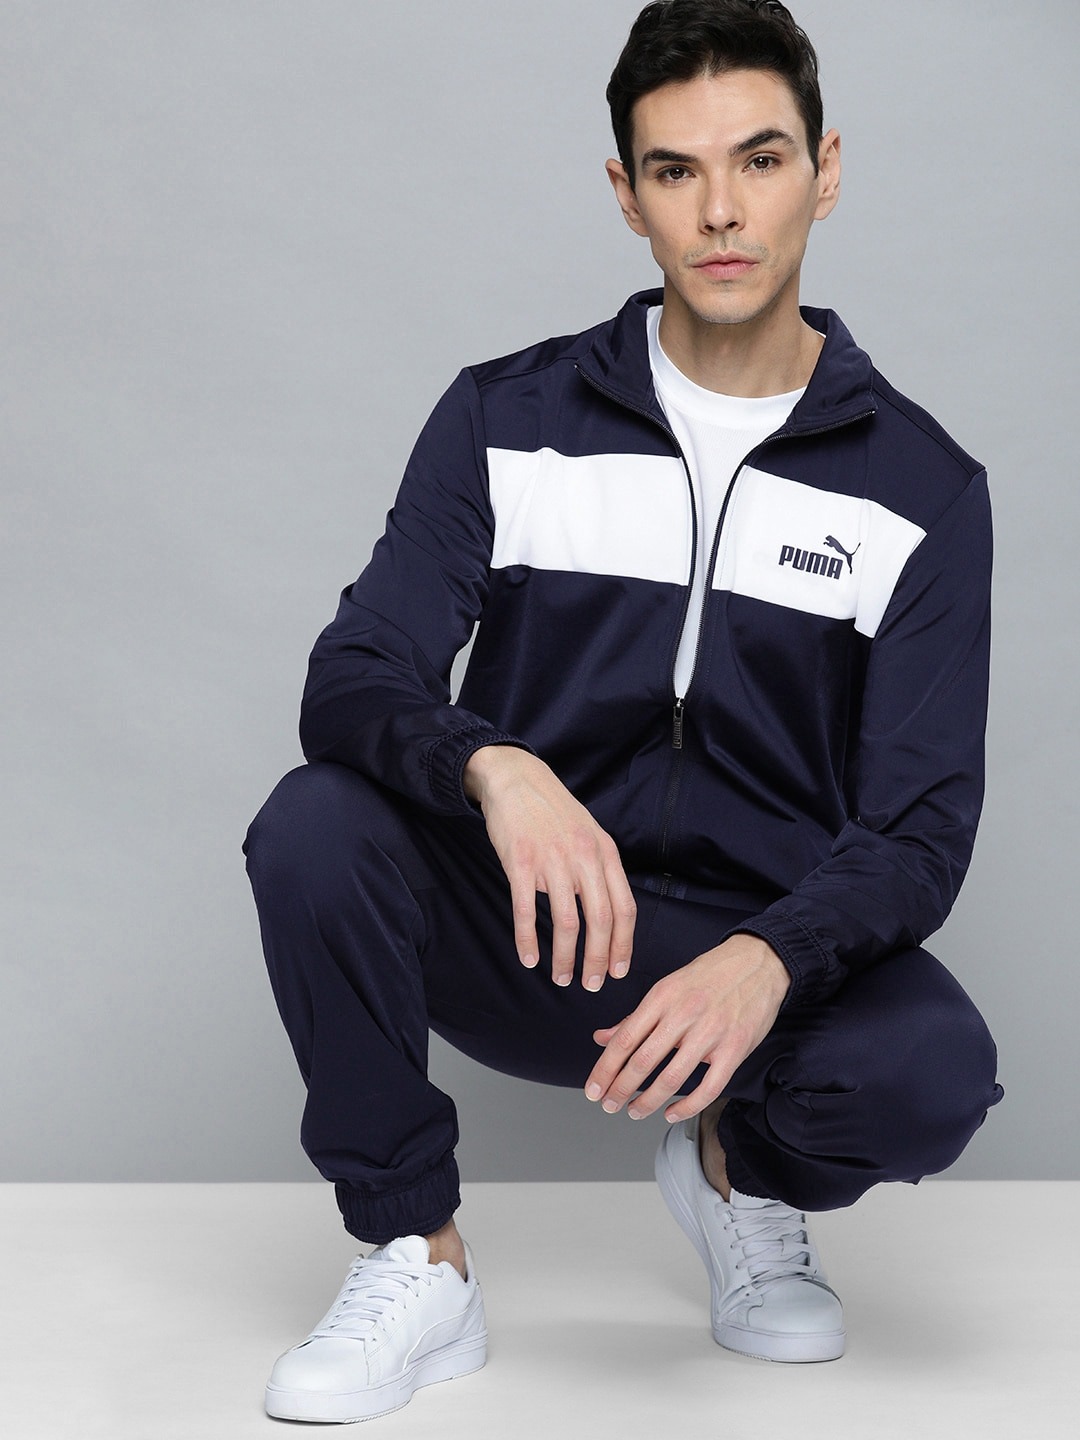 Clothing Tracksuits | Puma Men Navy Blue & White Colorblocked Polyester Tracksuit - ZL89816